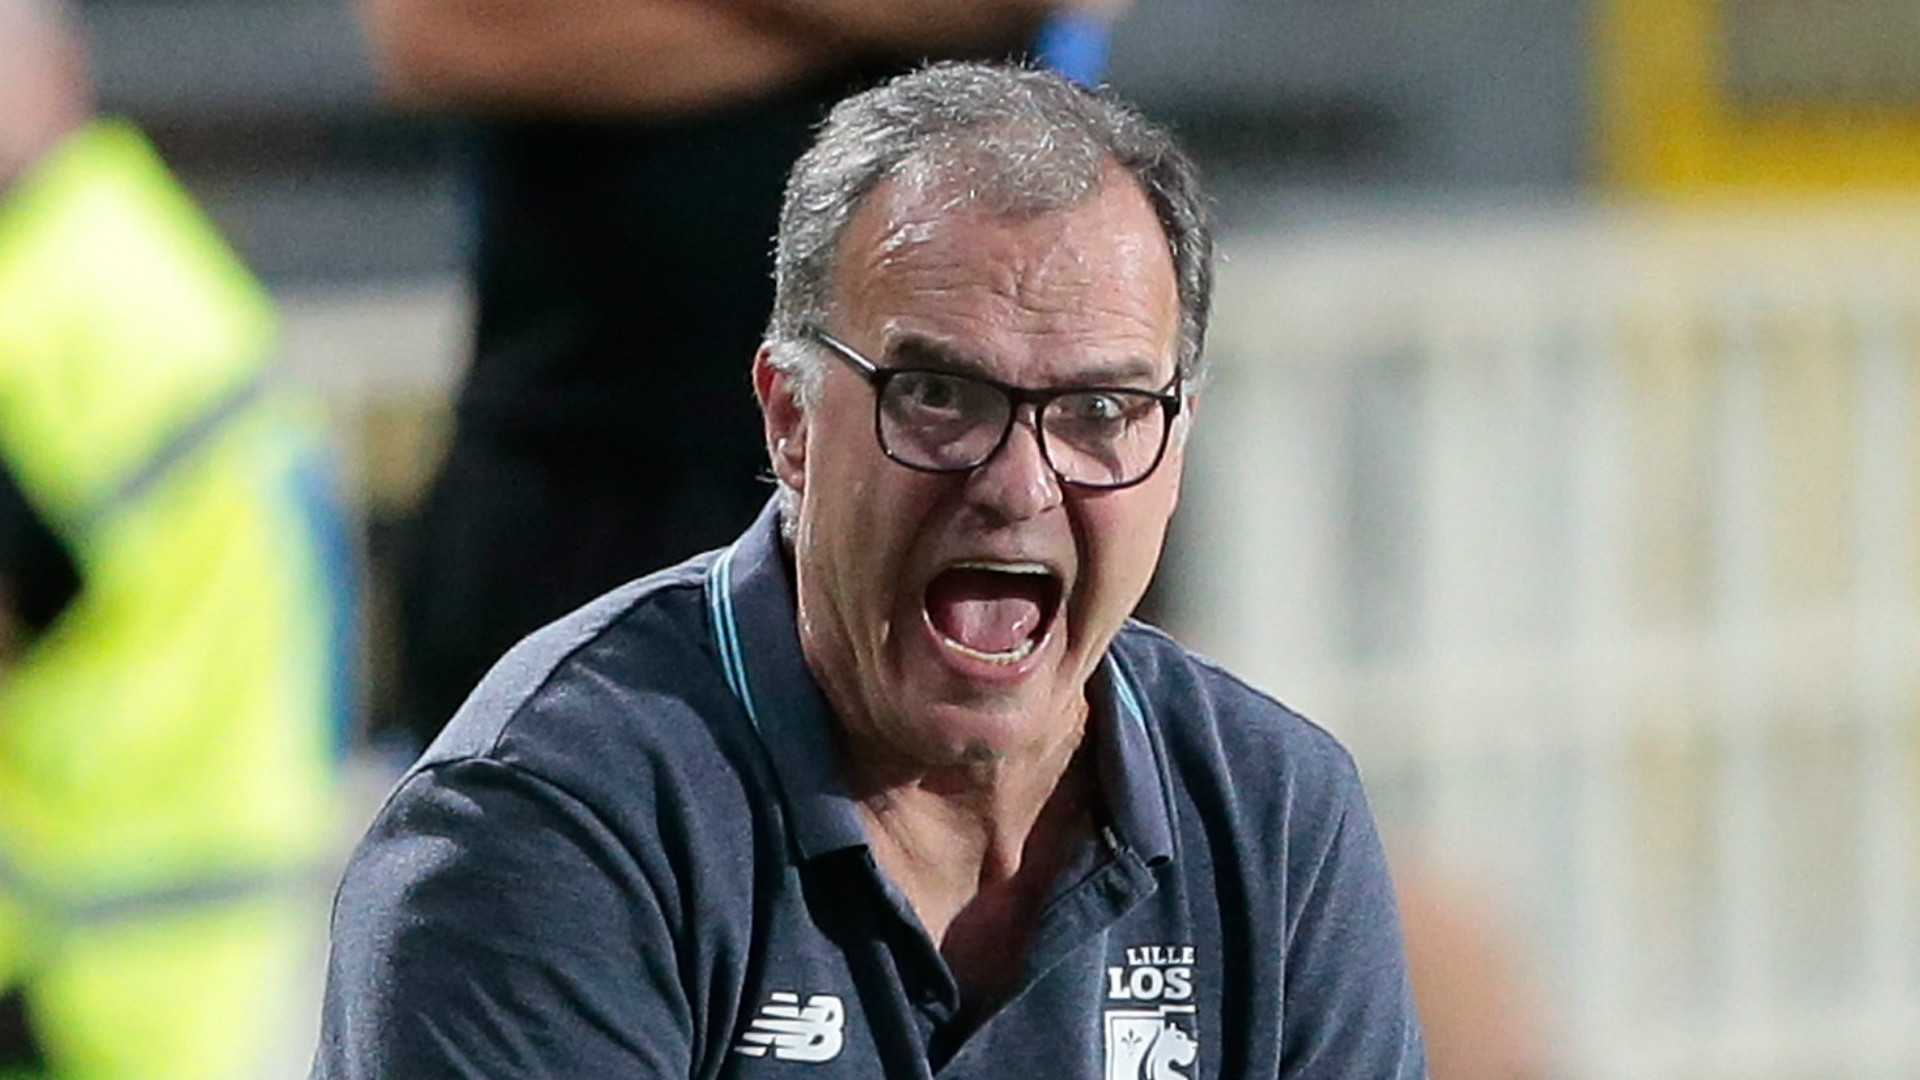 Bielsa marcelo leeds thesefootballtimes millwall channel kick disappointment guiding decade owns he swansea clash humble dortmund lucien borussia brought favre